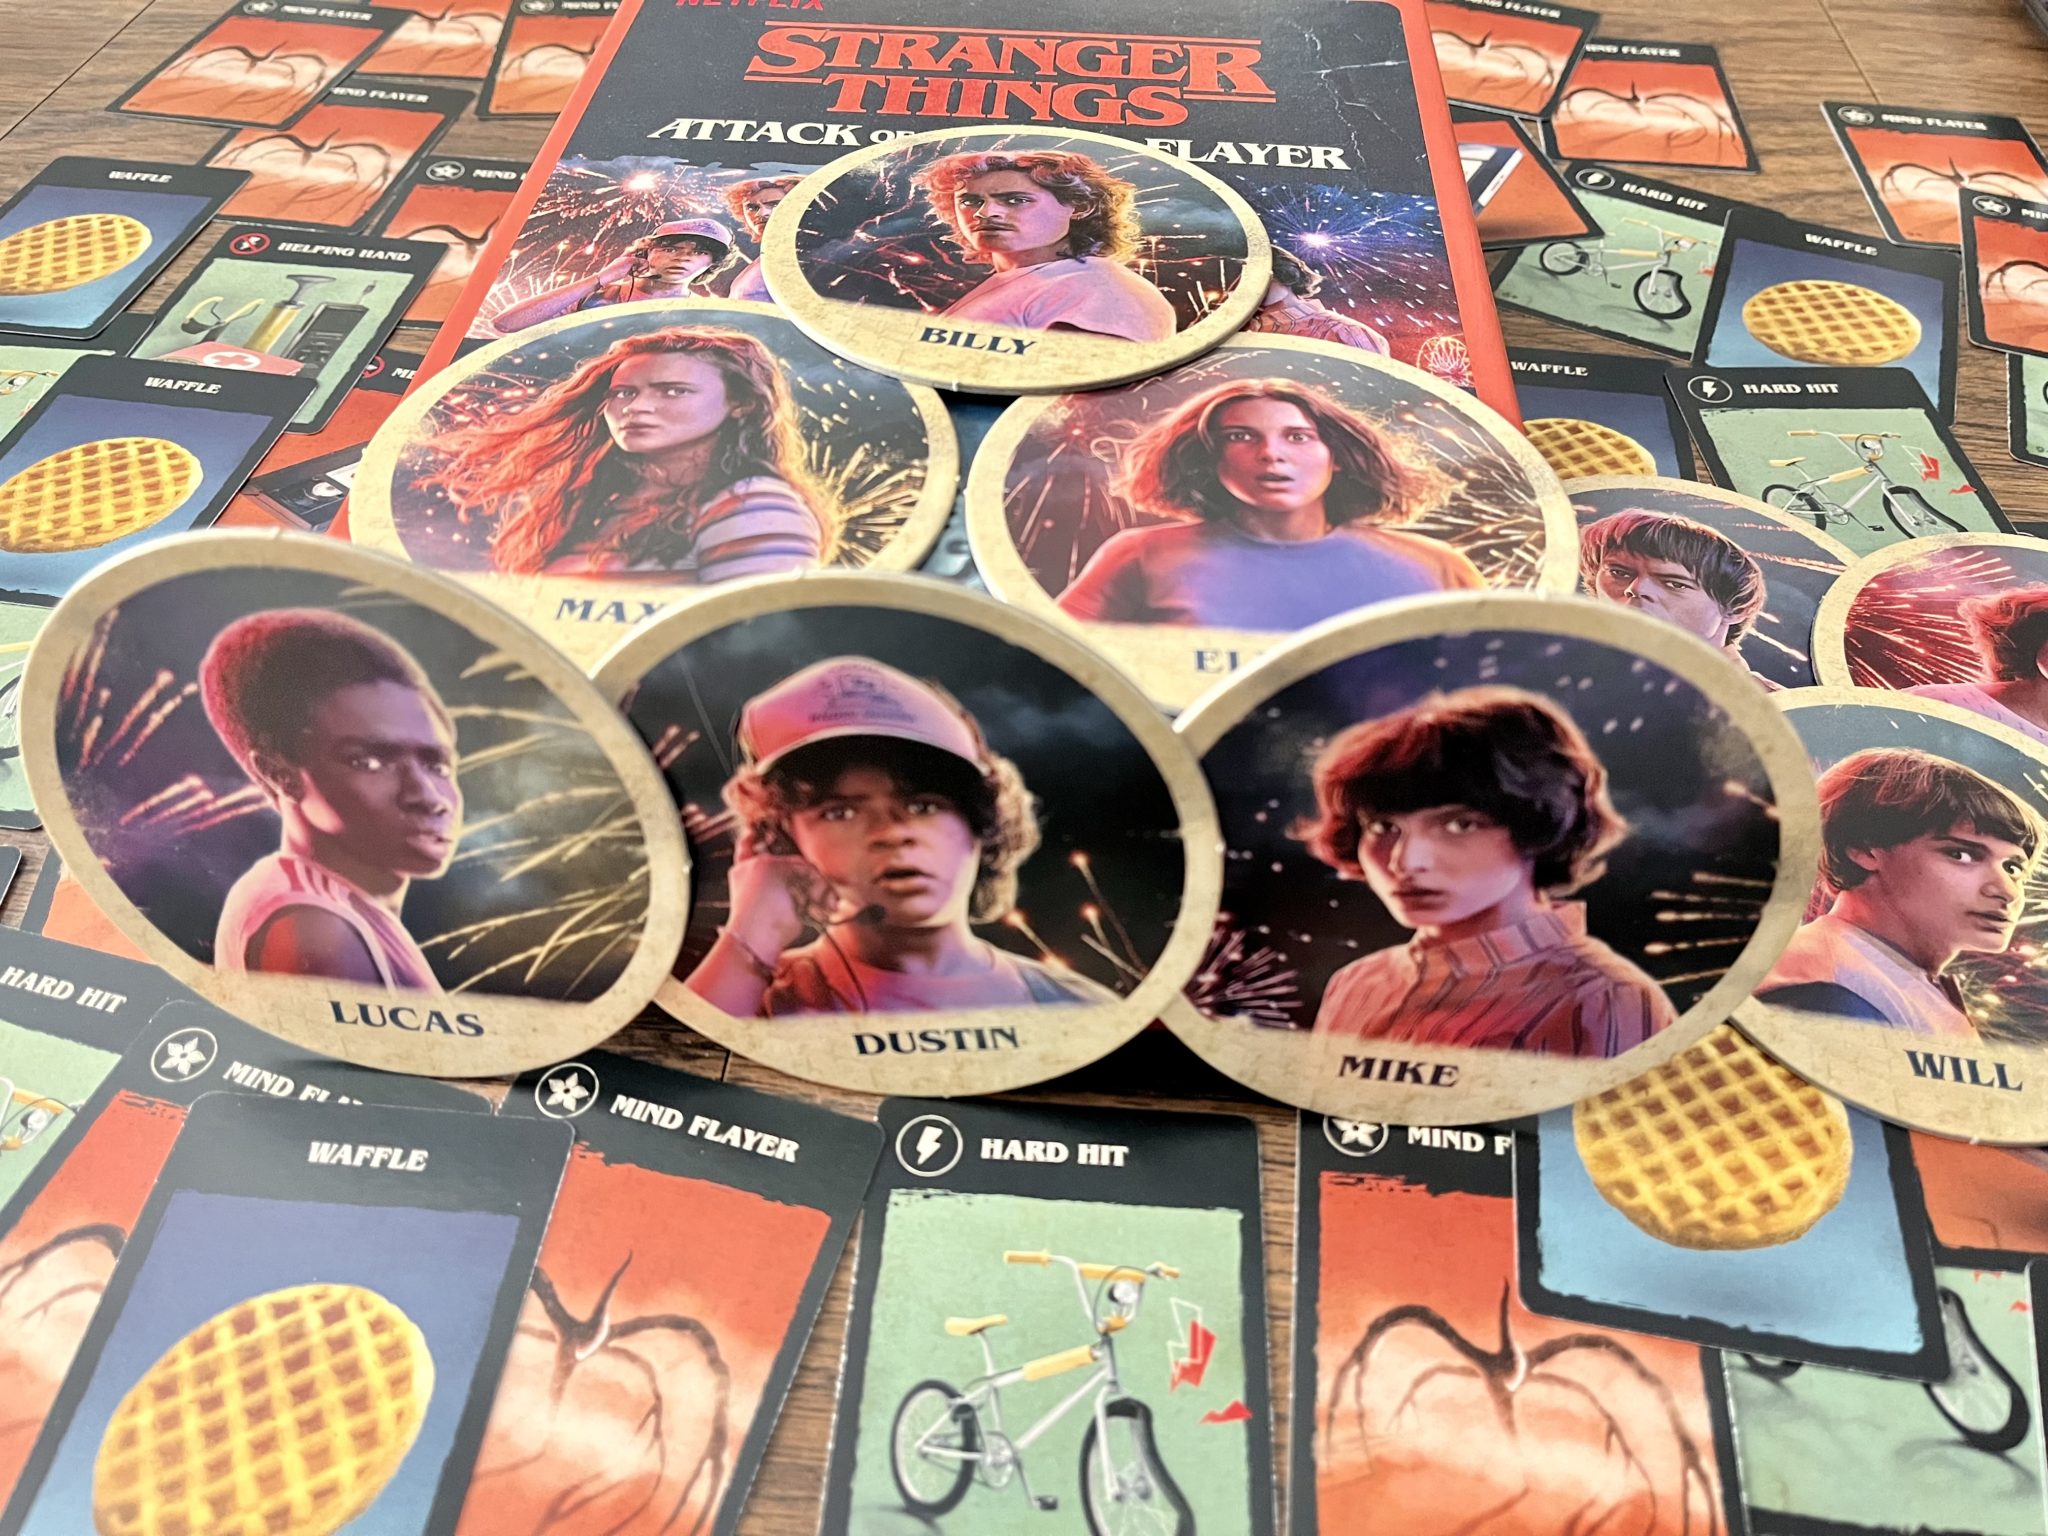 Stranger Things: Attack of the Mind Flayer on the table